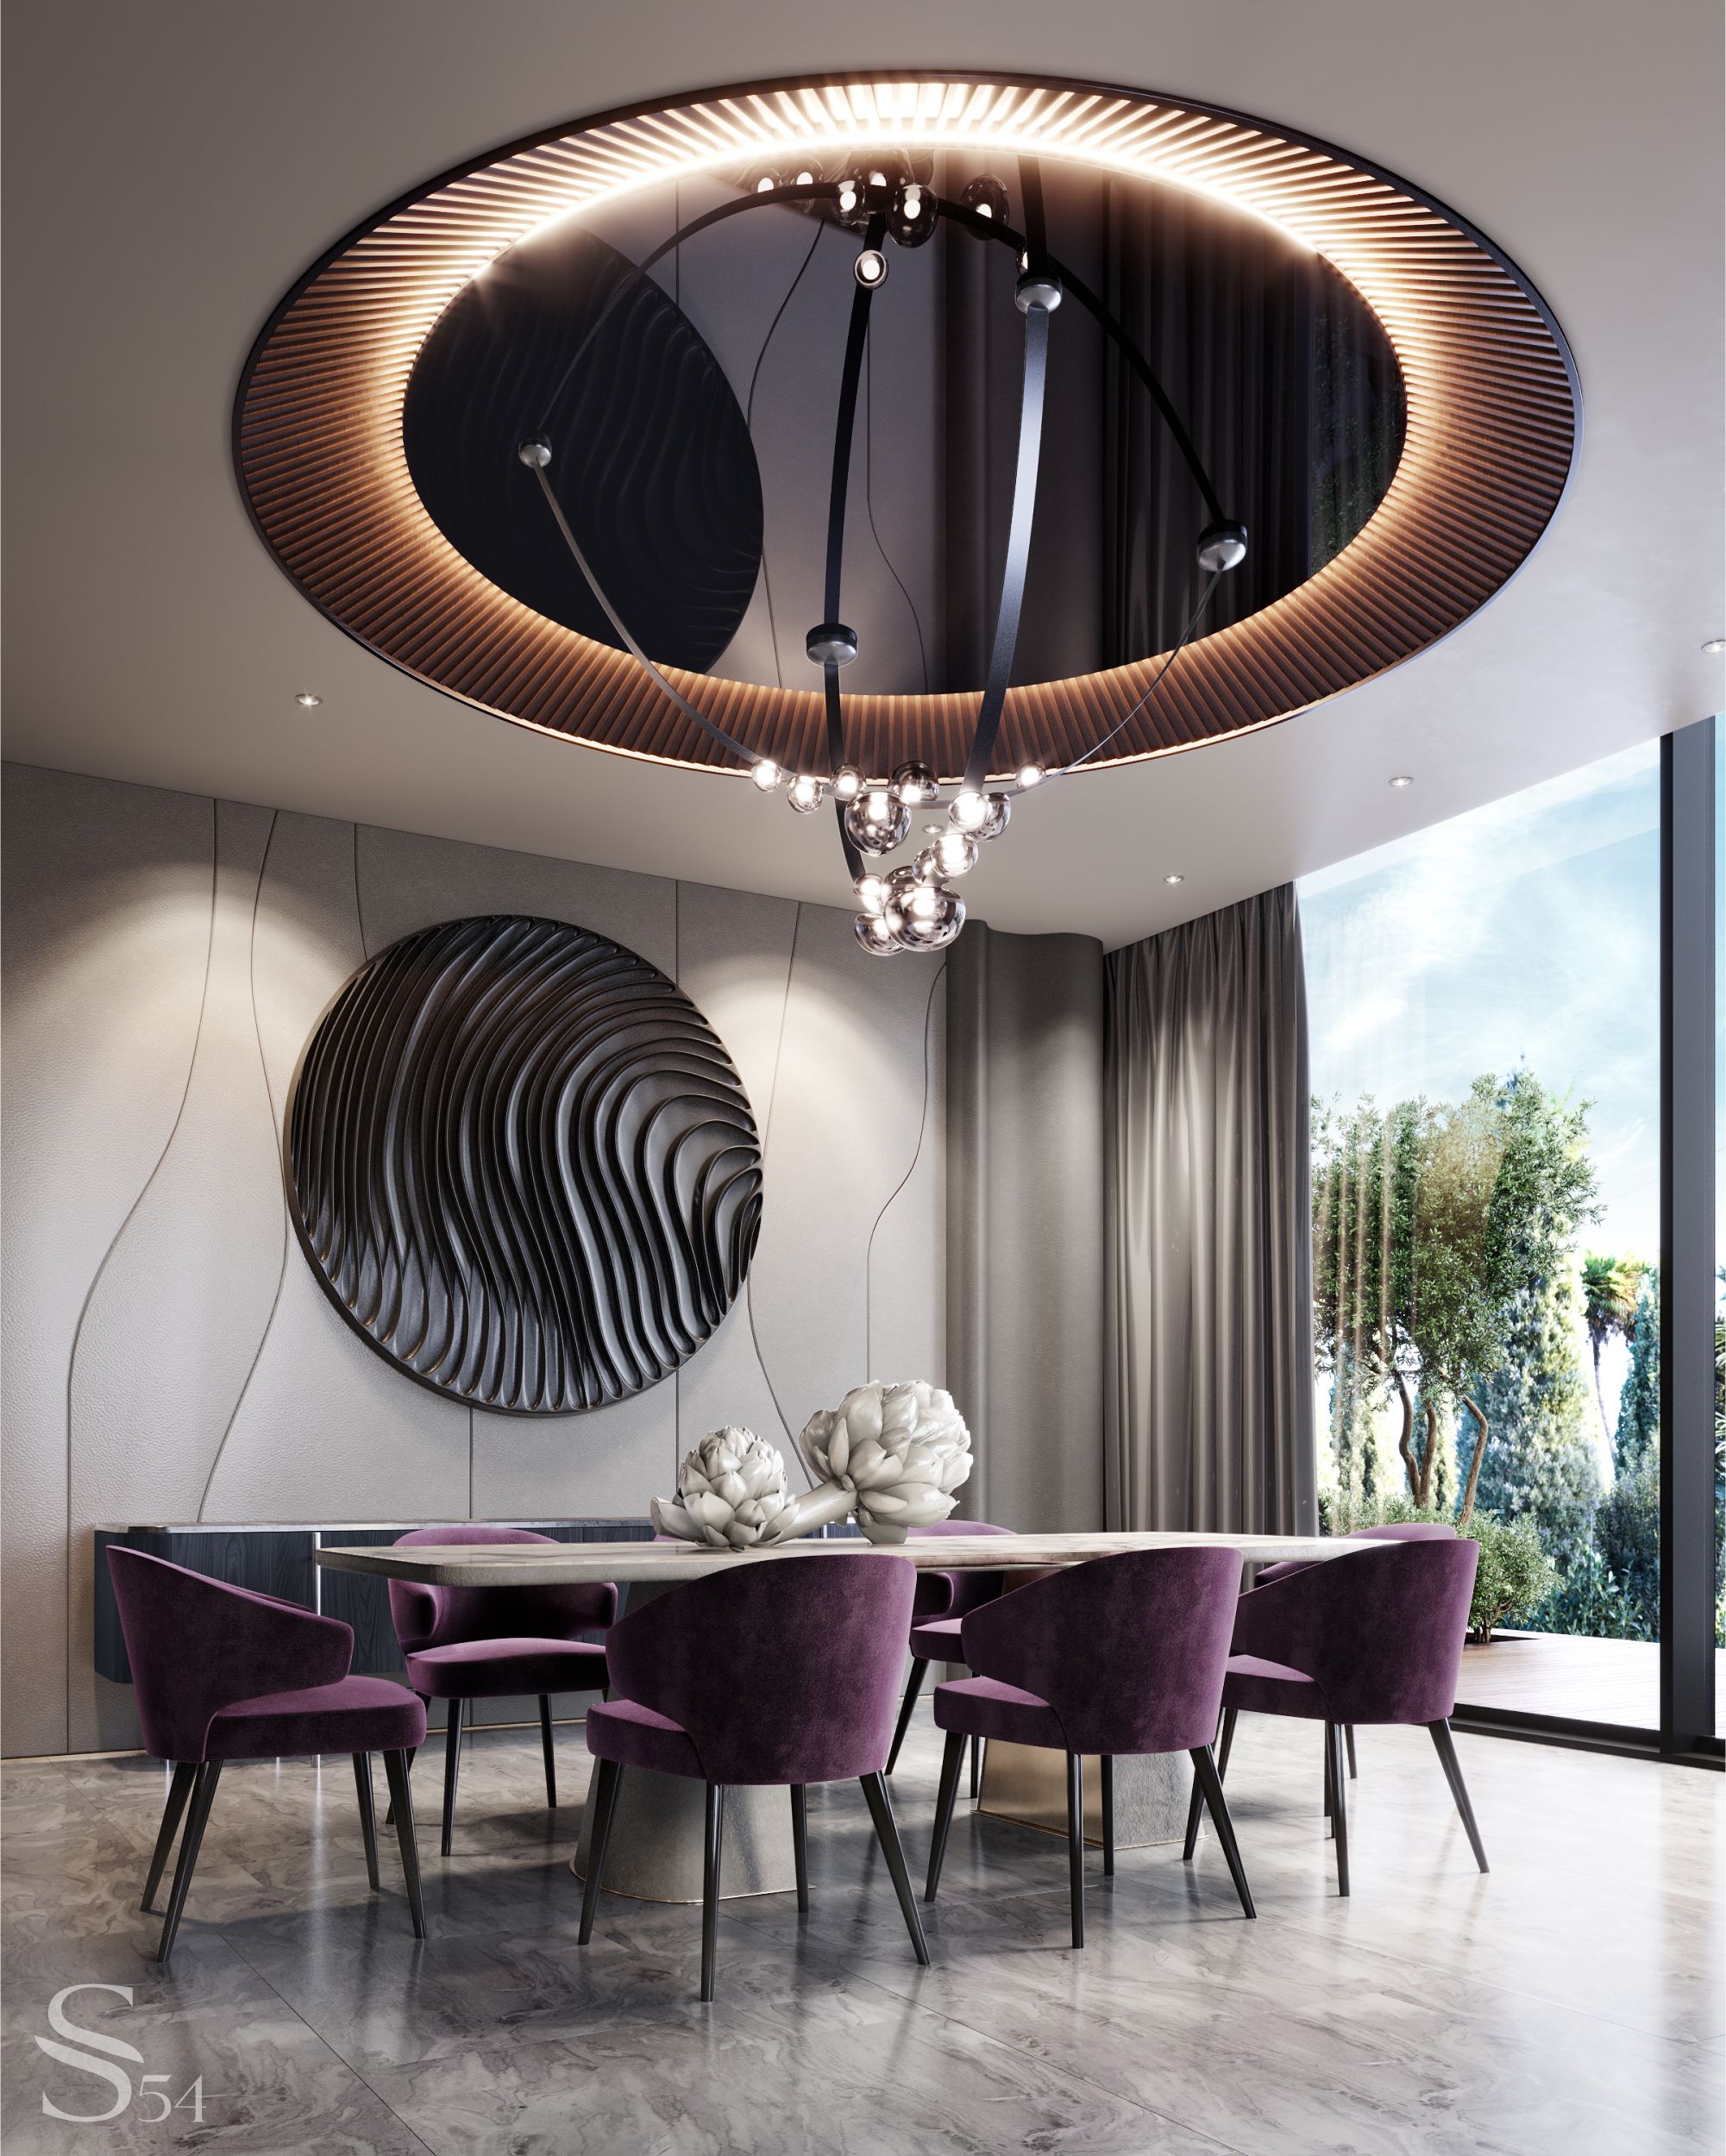 The second family dining area, a dining group in grape tones